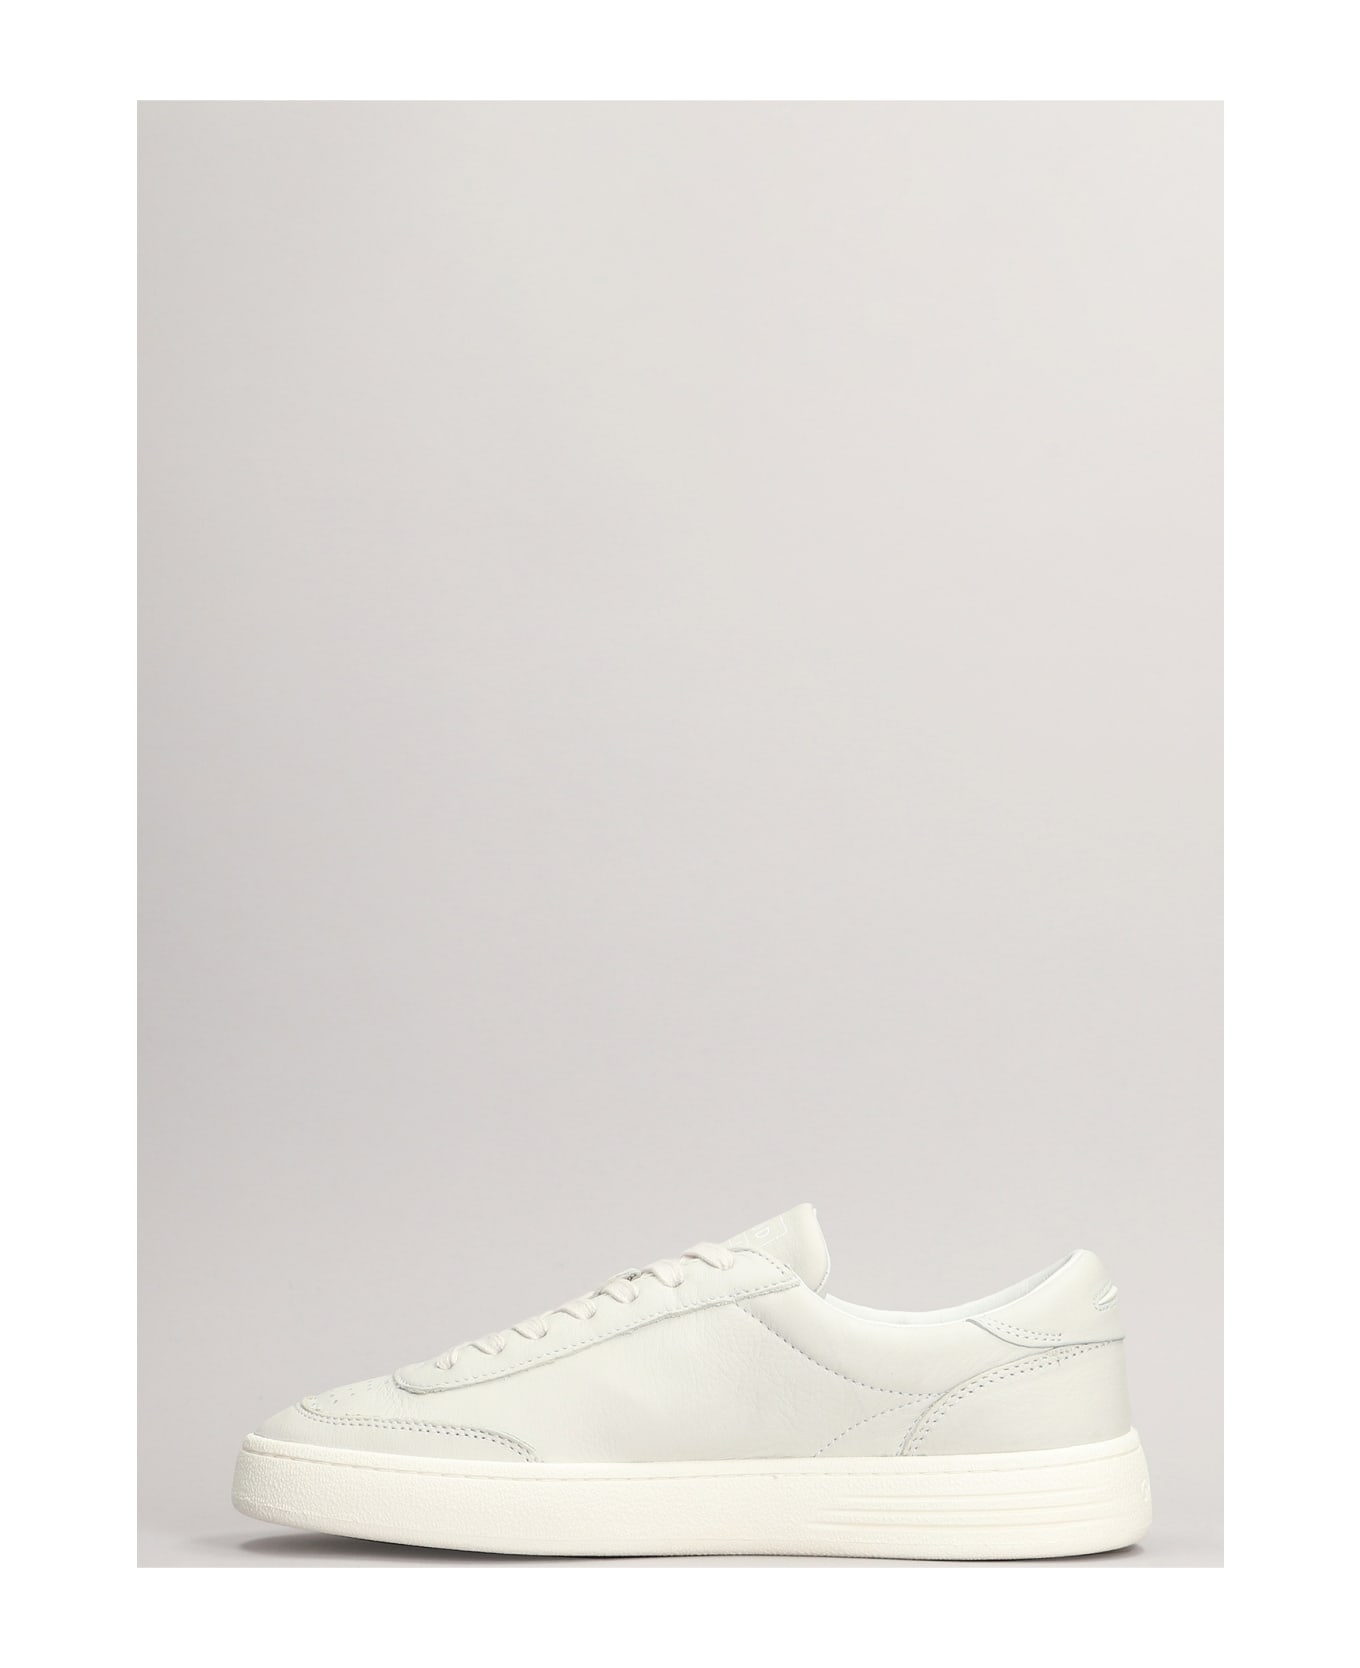 GHOUD Lindo Low Sneakers In Grey Leather - NEUTRALS スニーカー